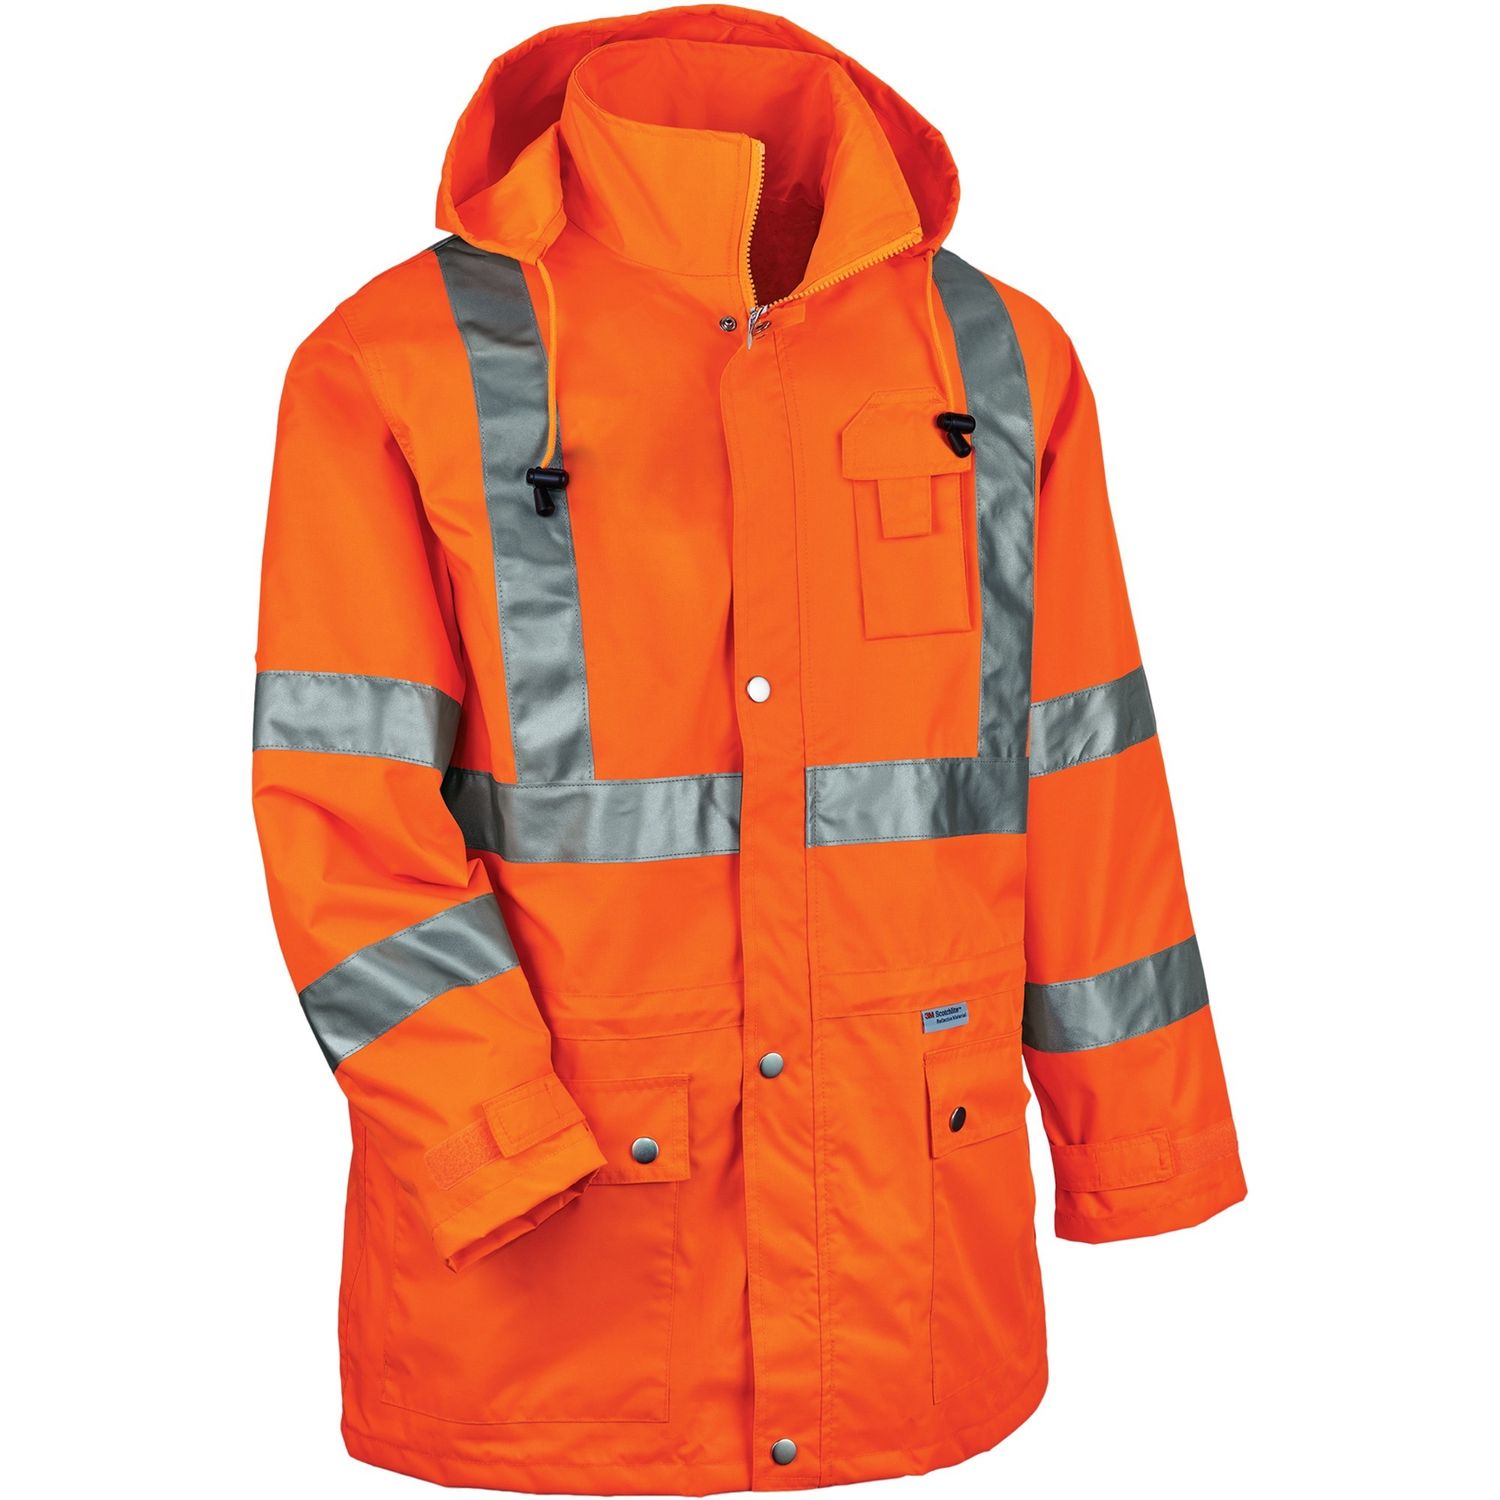 8365 Type R Class 3 Rain Jacket Recommended for: Construction, Utility, Emergency, Cell Phone, Airline Crew, Railway Worker, Survey Crew